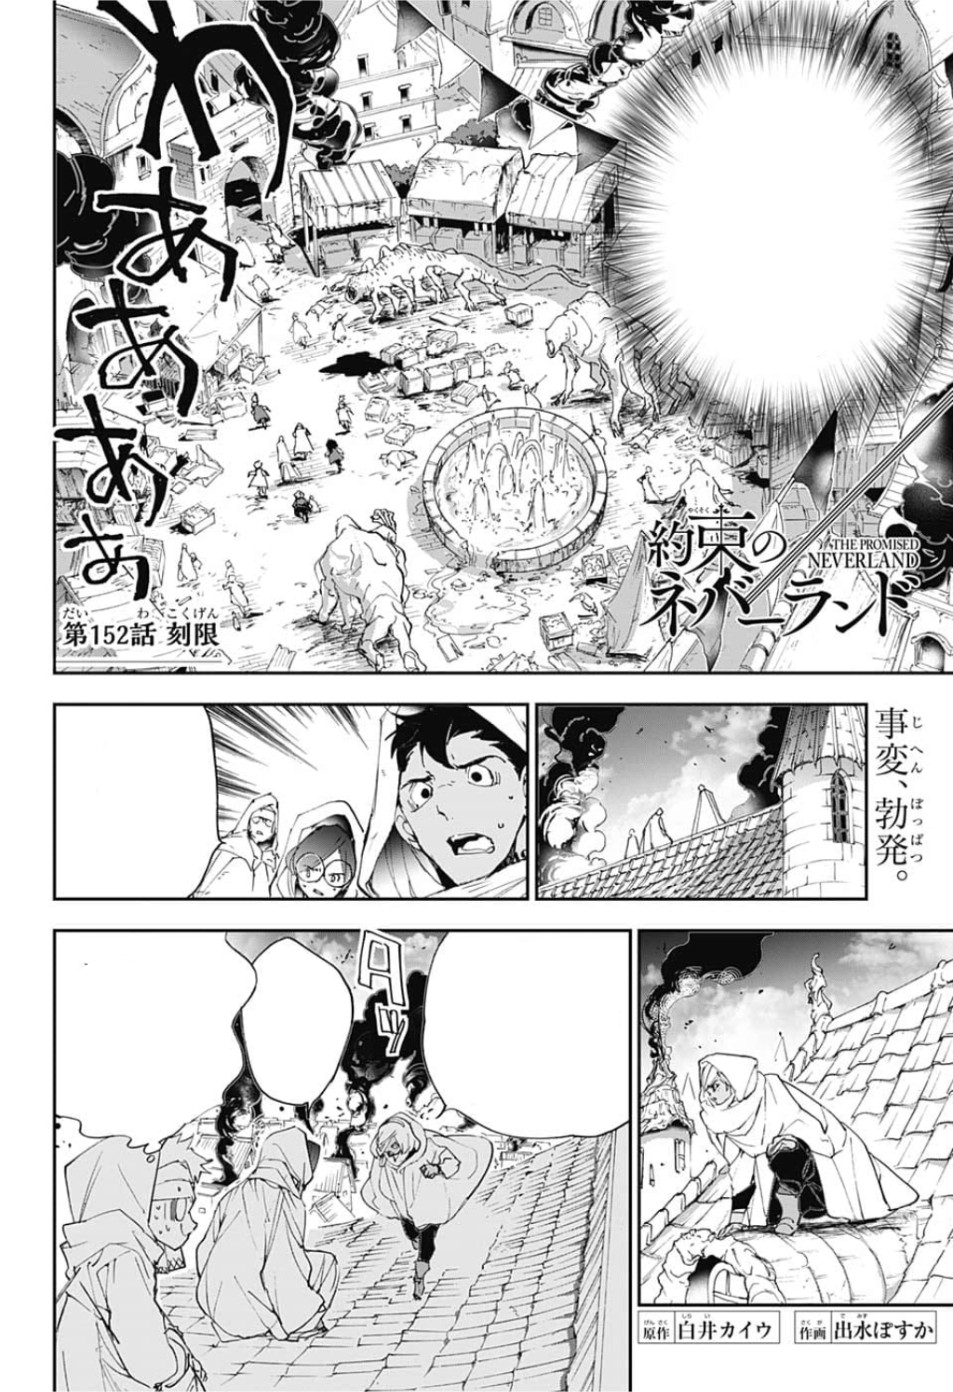 Volume 13, The Promised Neverland Wiki, FANDOM powered by Wikia